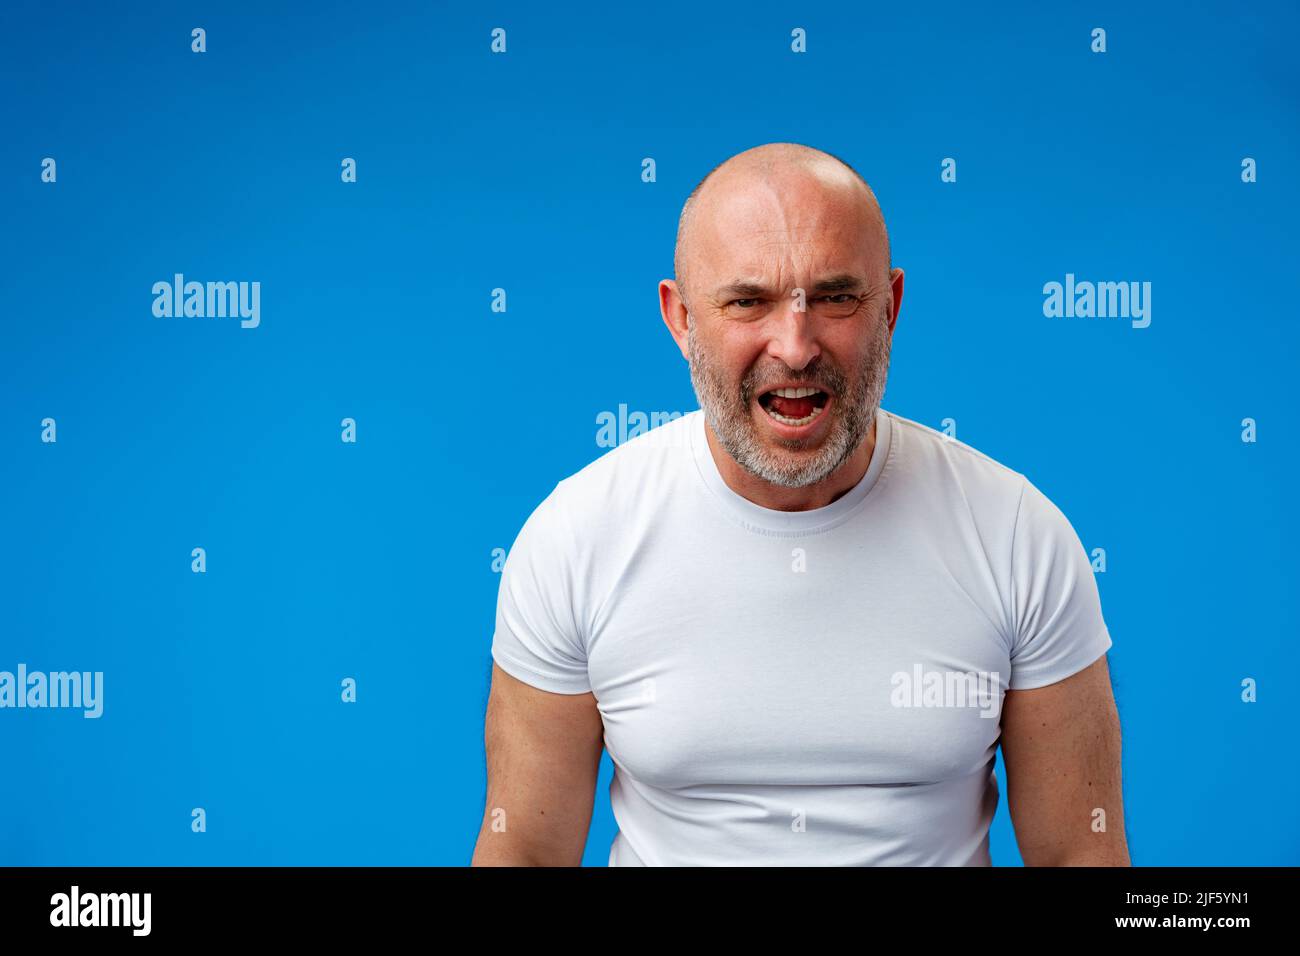 Frustrated bearded man shouting and screaming against blue wall Stock Photo